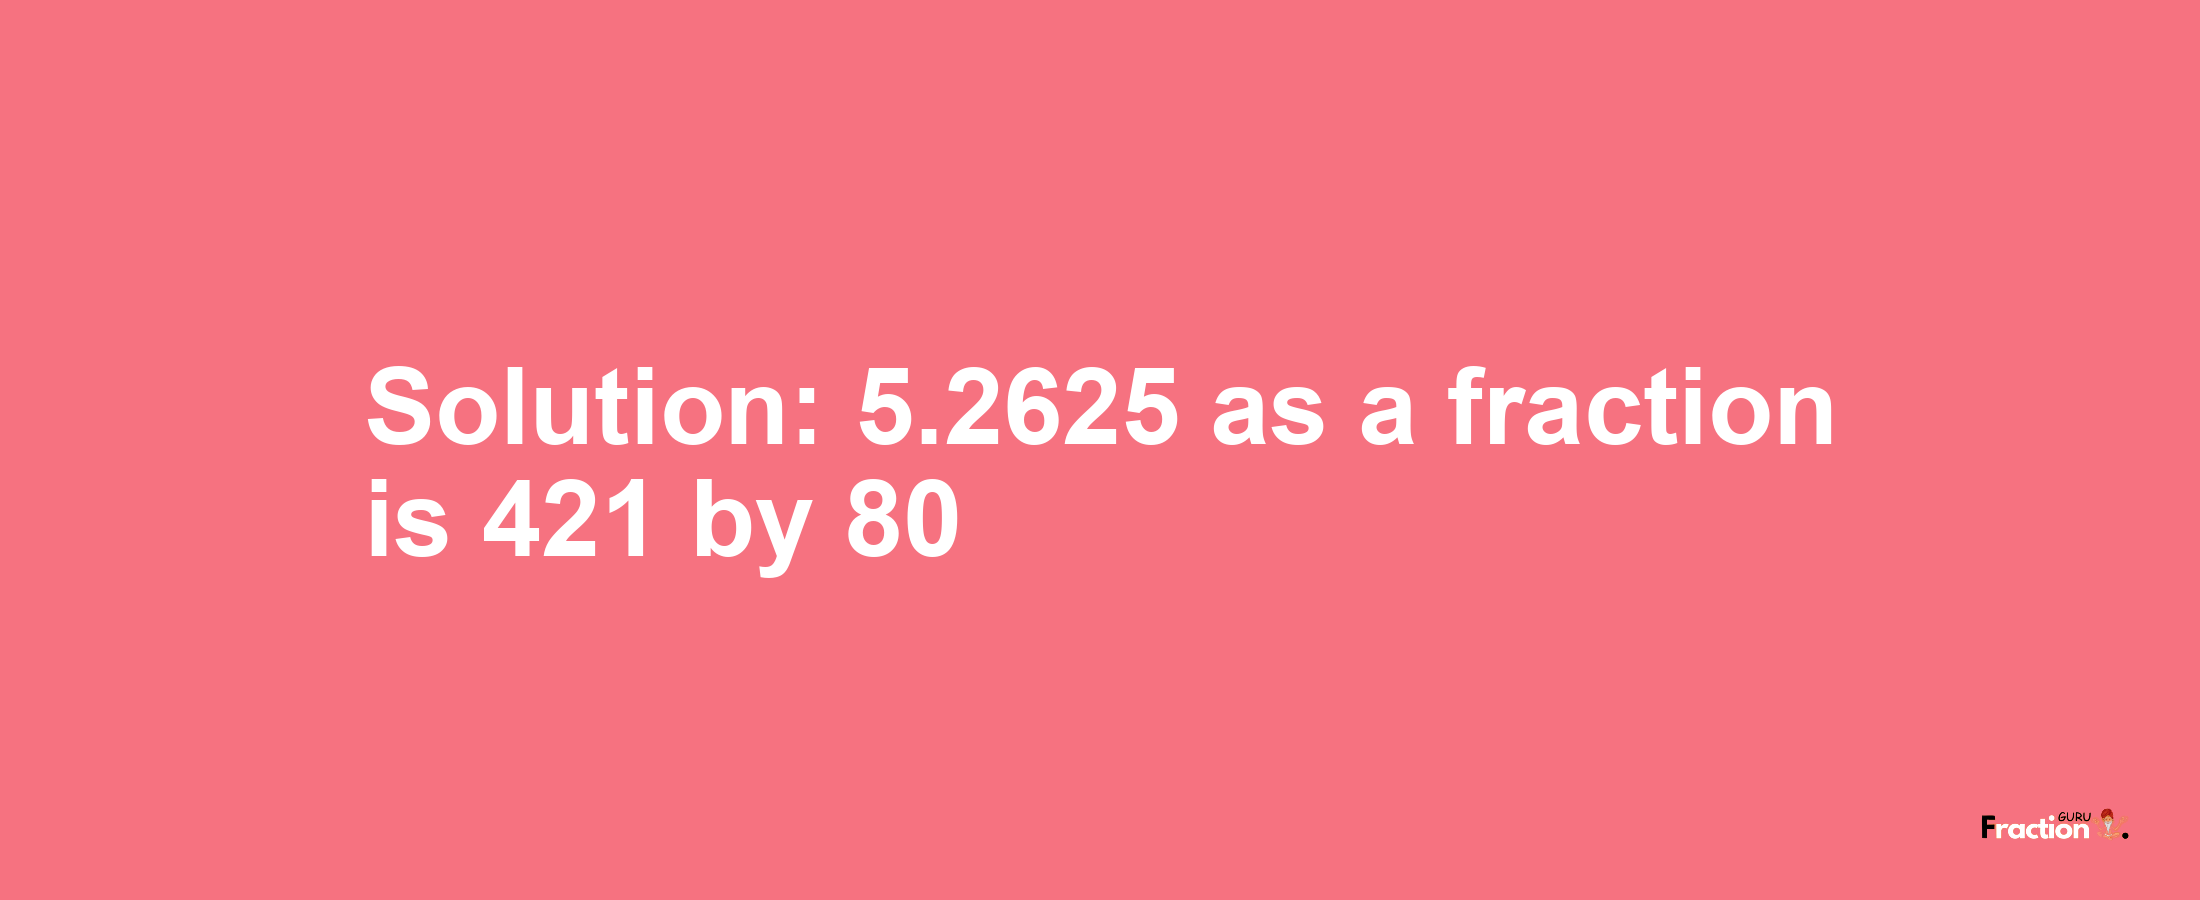 Solution:5.2625 as a fraction is 421/80